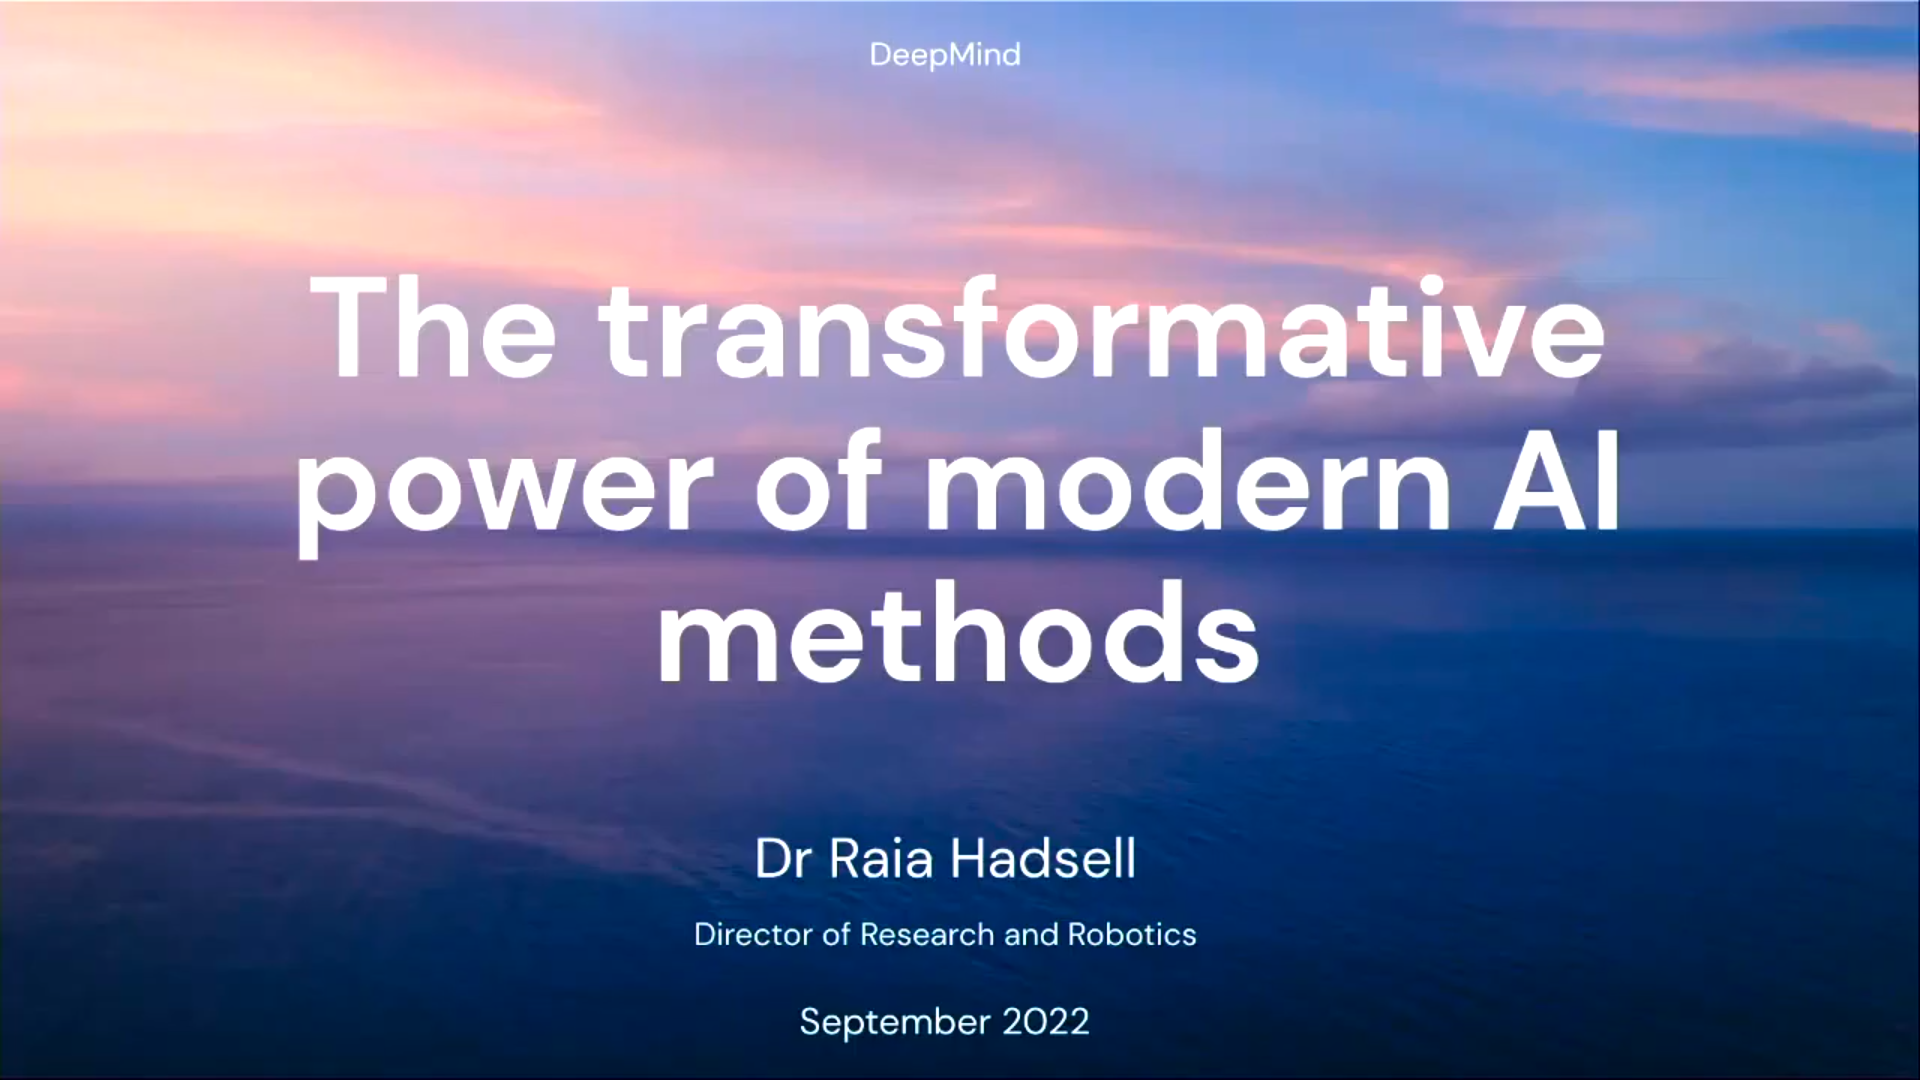 IEEE ICDL 2022 Keynote 4 - The Transformative Power of Modern AI Methods